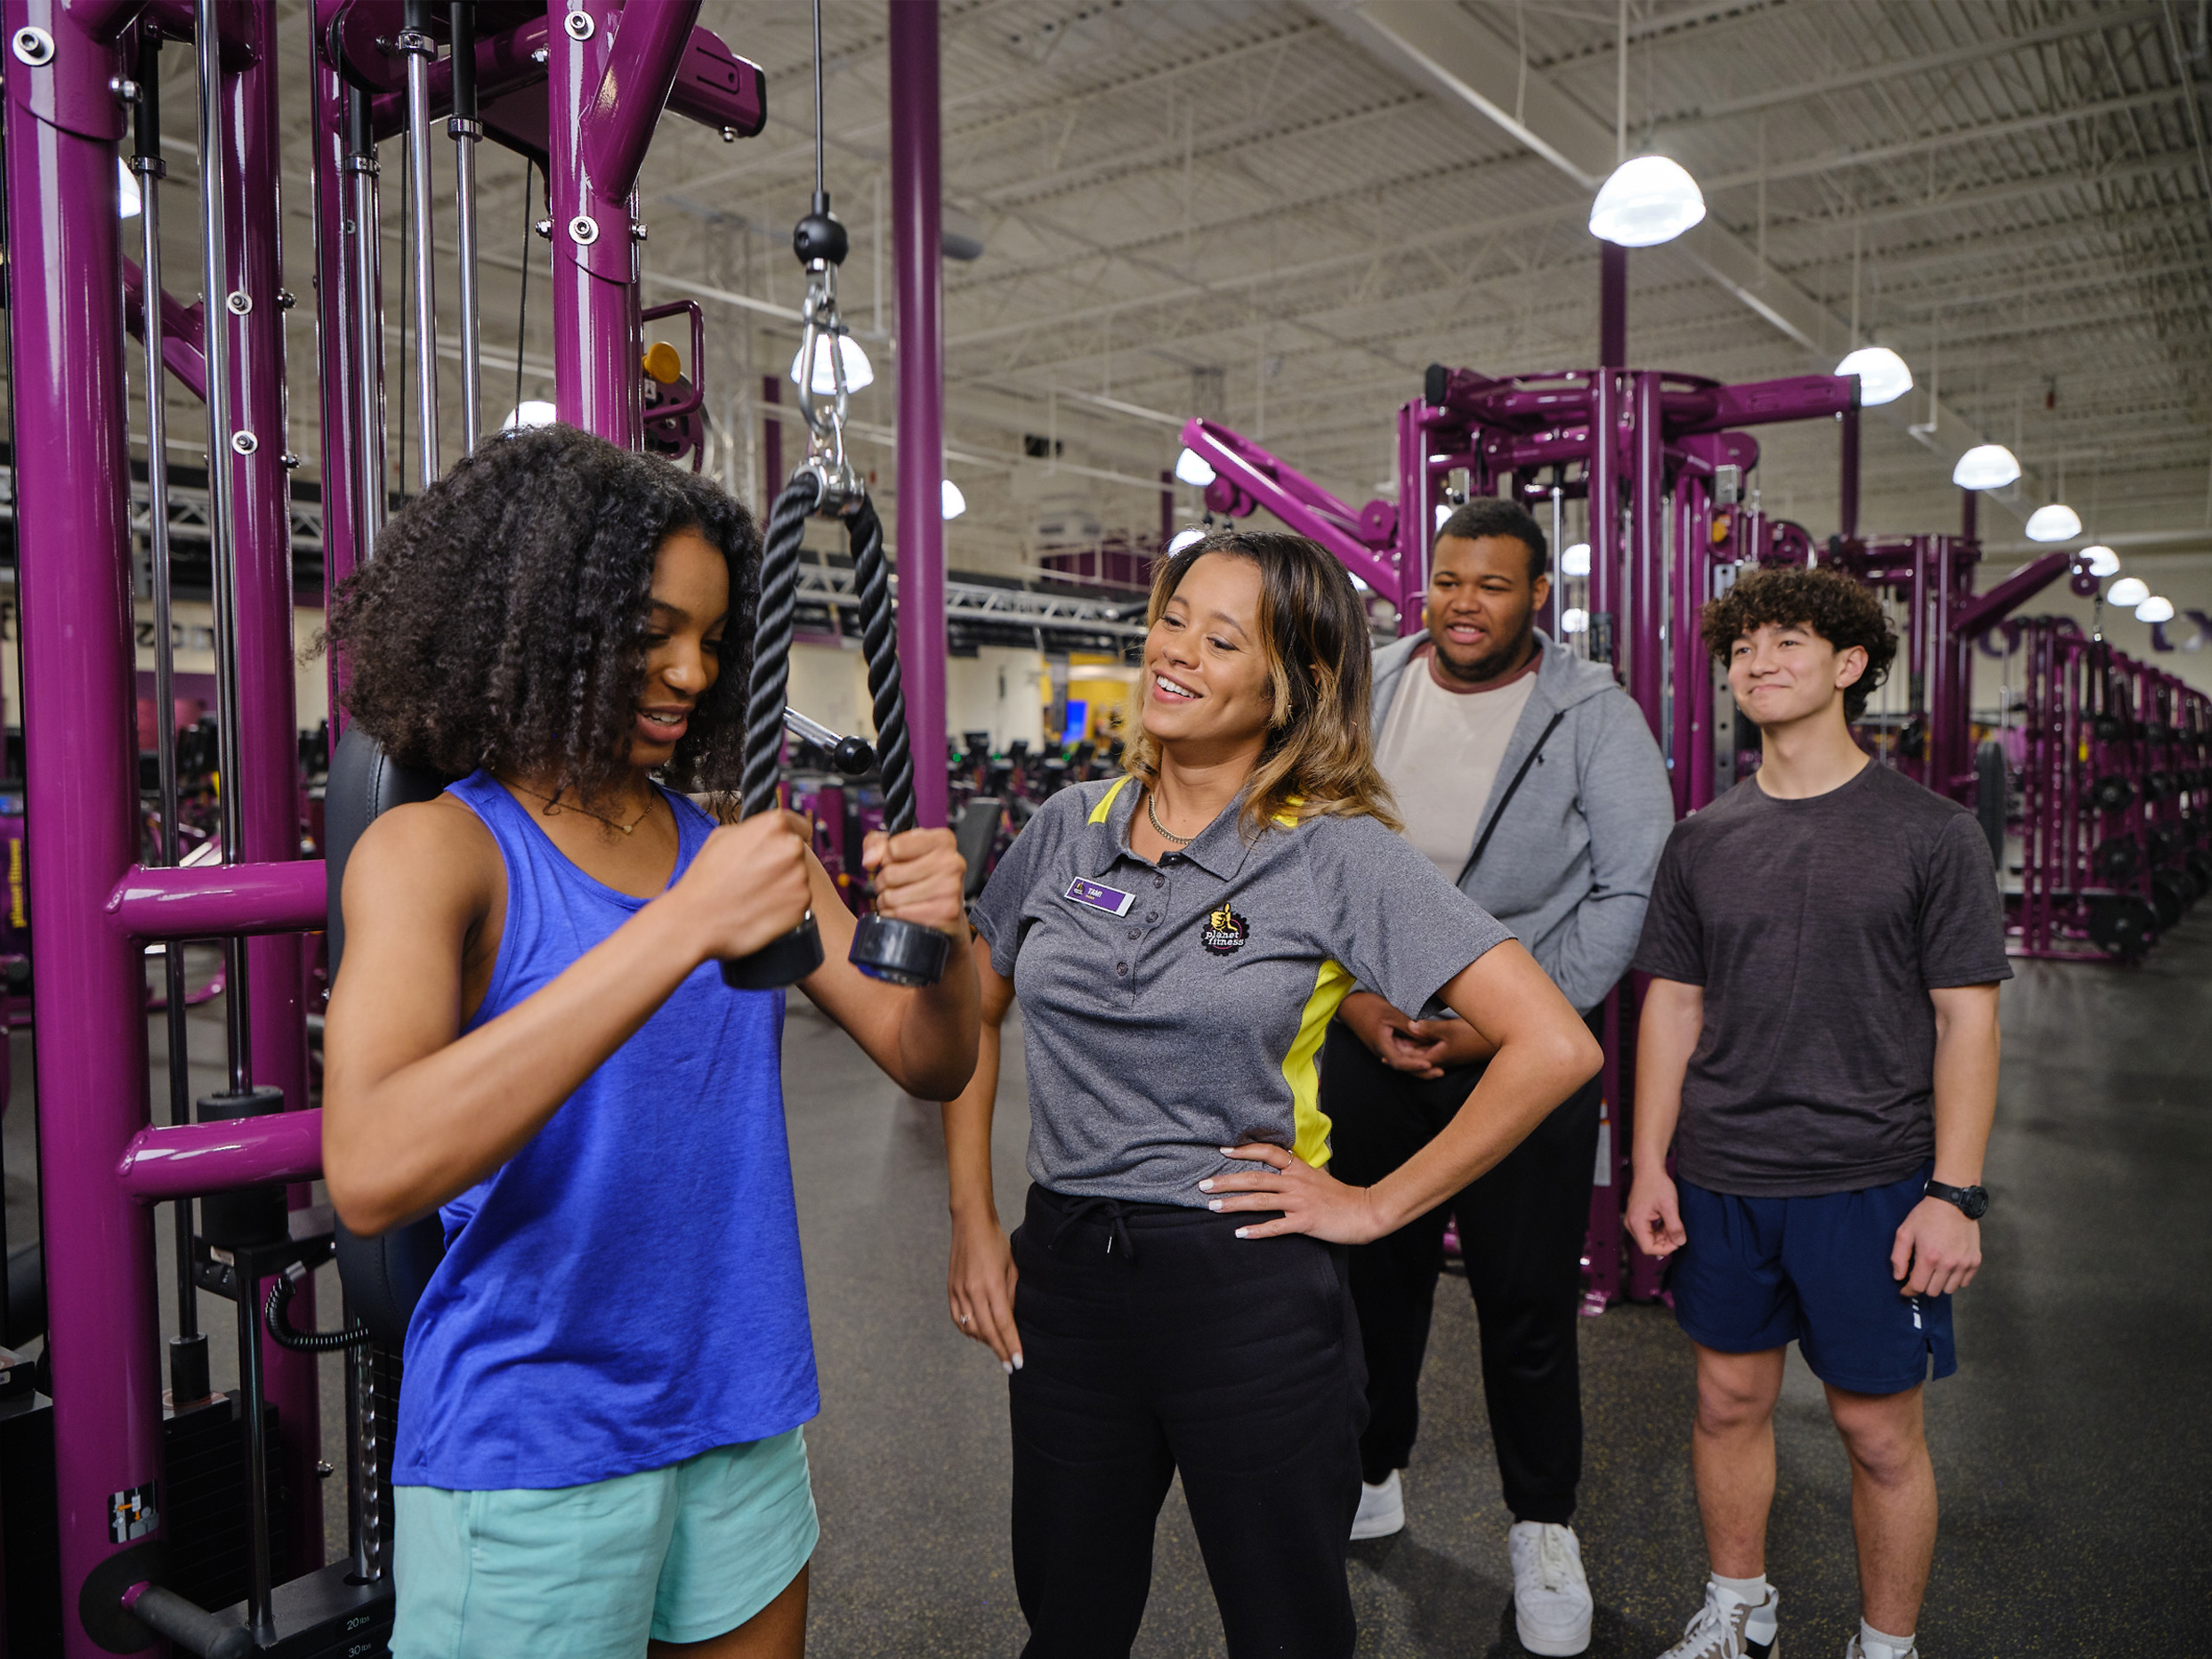 Planet Fitness Invites Houston Teens to Work Out for FREE All Summer Long  From May 15 - August 31, Houston Style Magazine